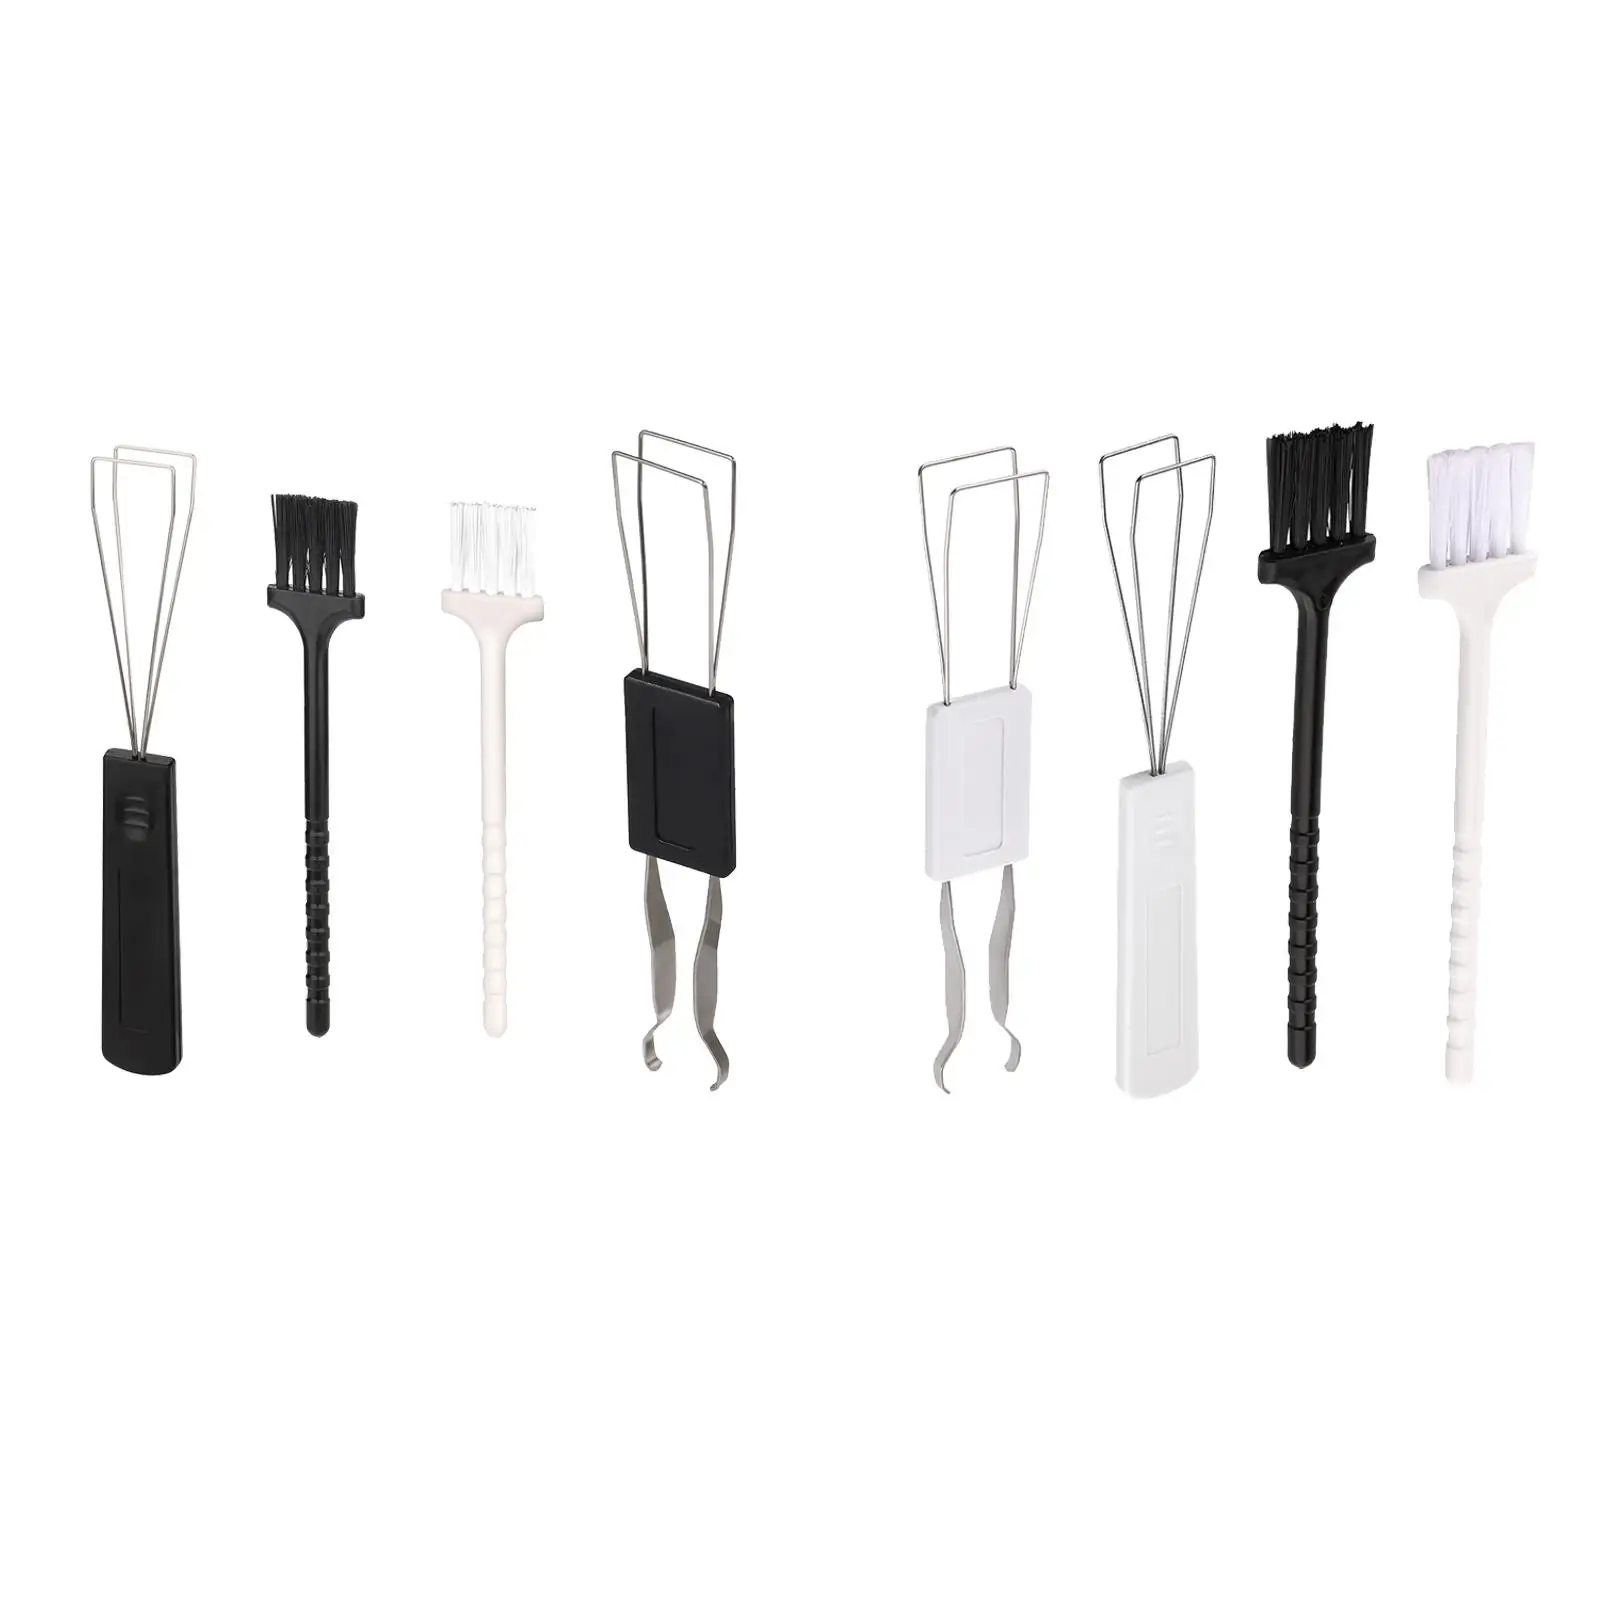 Mechanical Keyboard Brush Set Convenient Durable Key Cap Shaft Remover Tool Kit Keycap Pullers for Fans Electronics Radiators